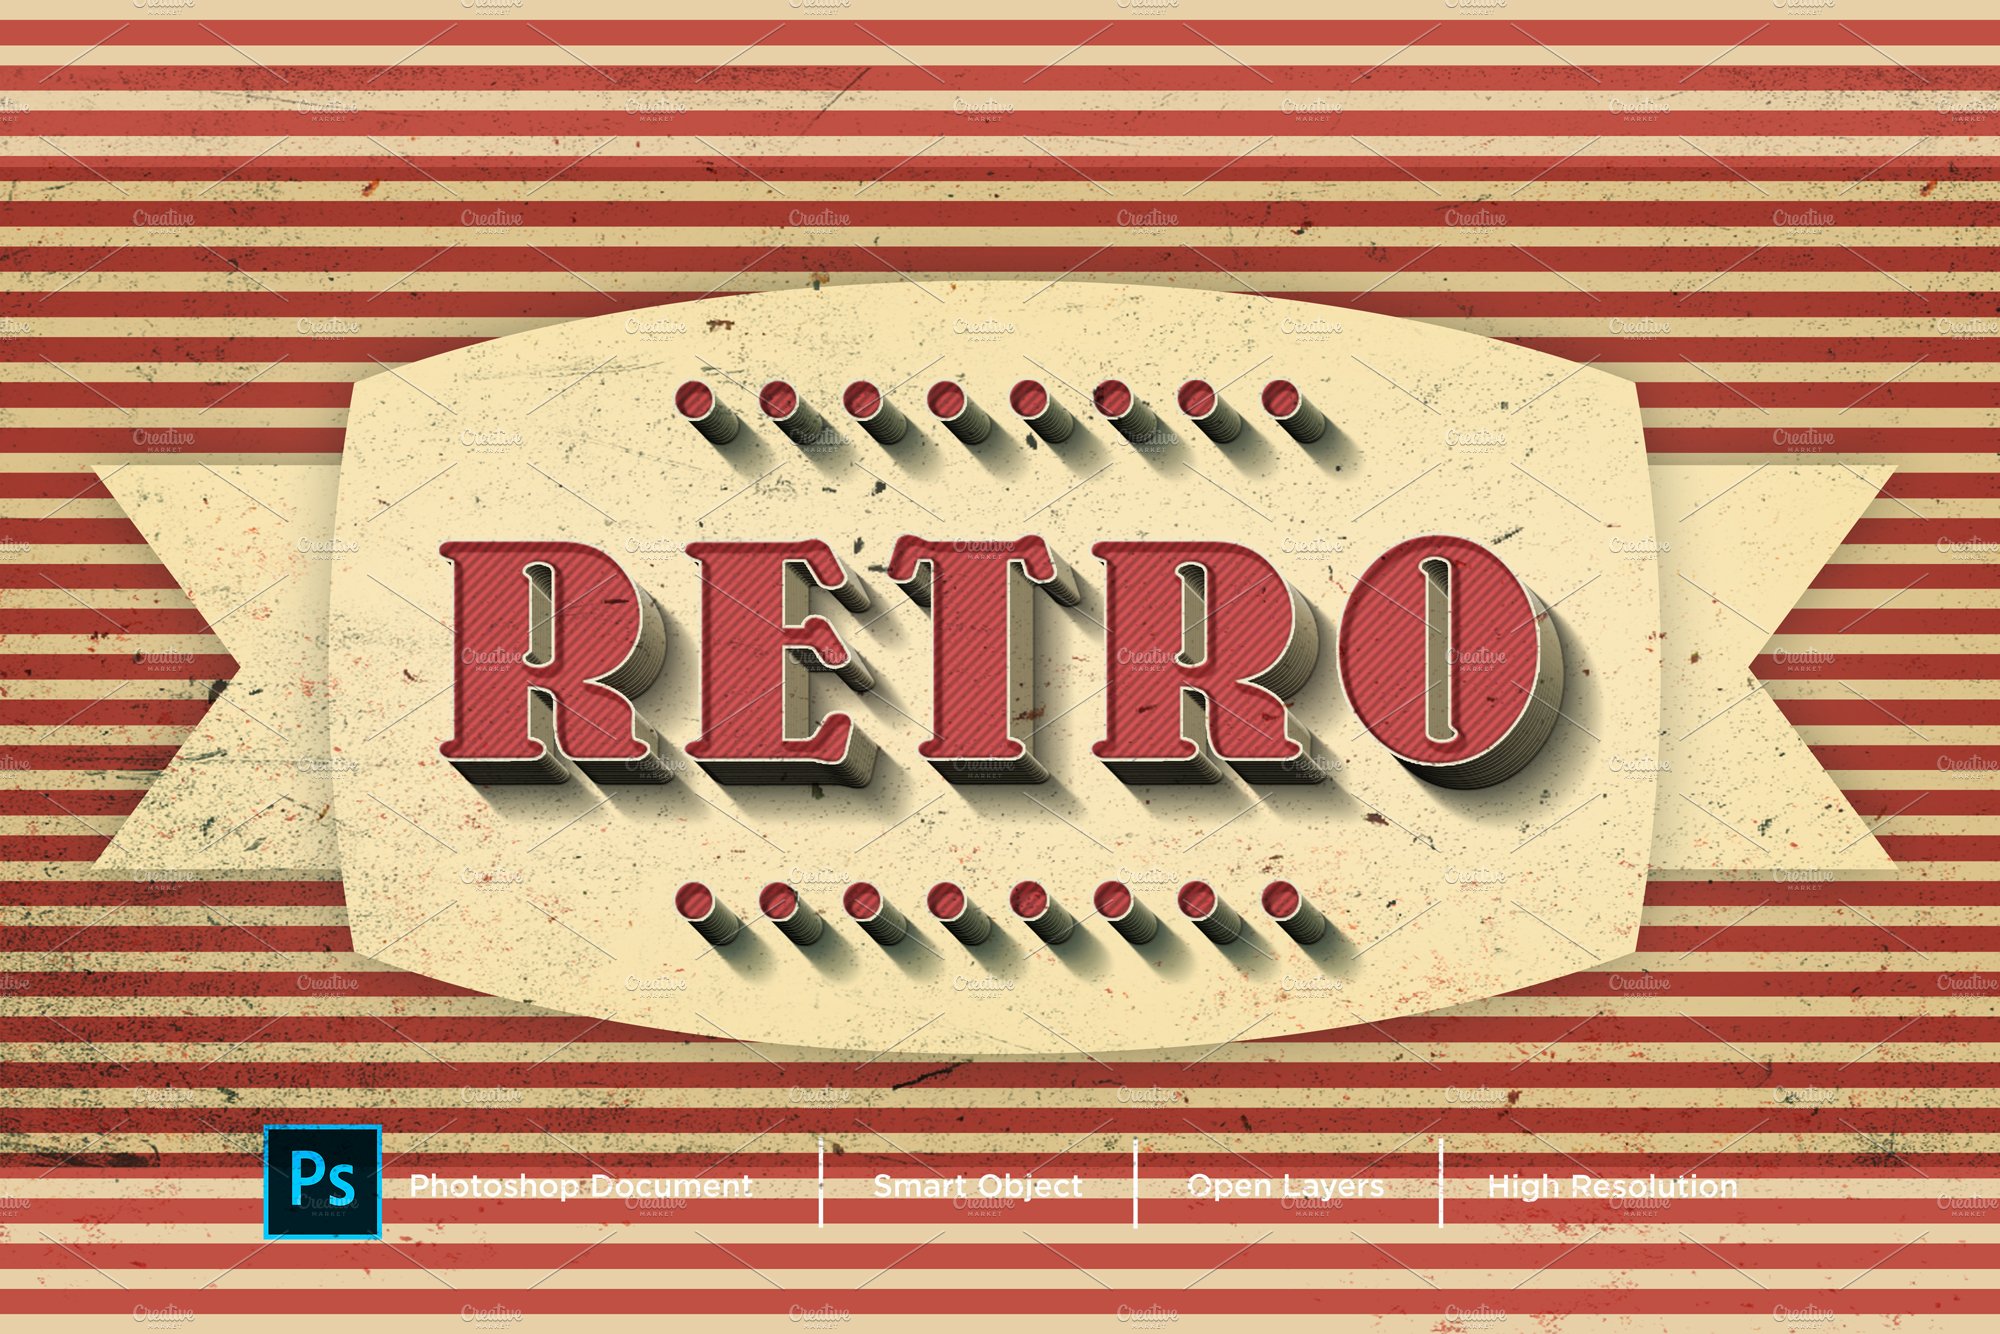 Retro Text Effect & Layer Stylecover image.